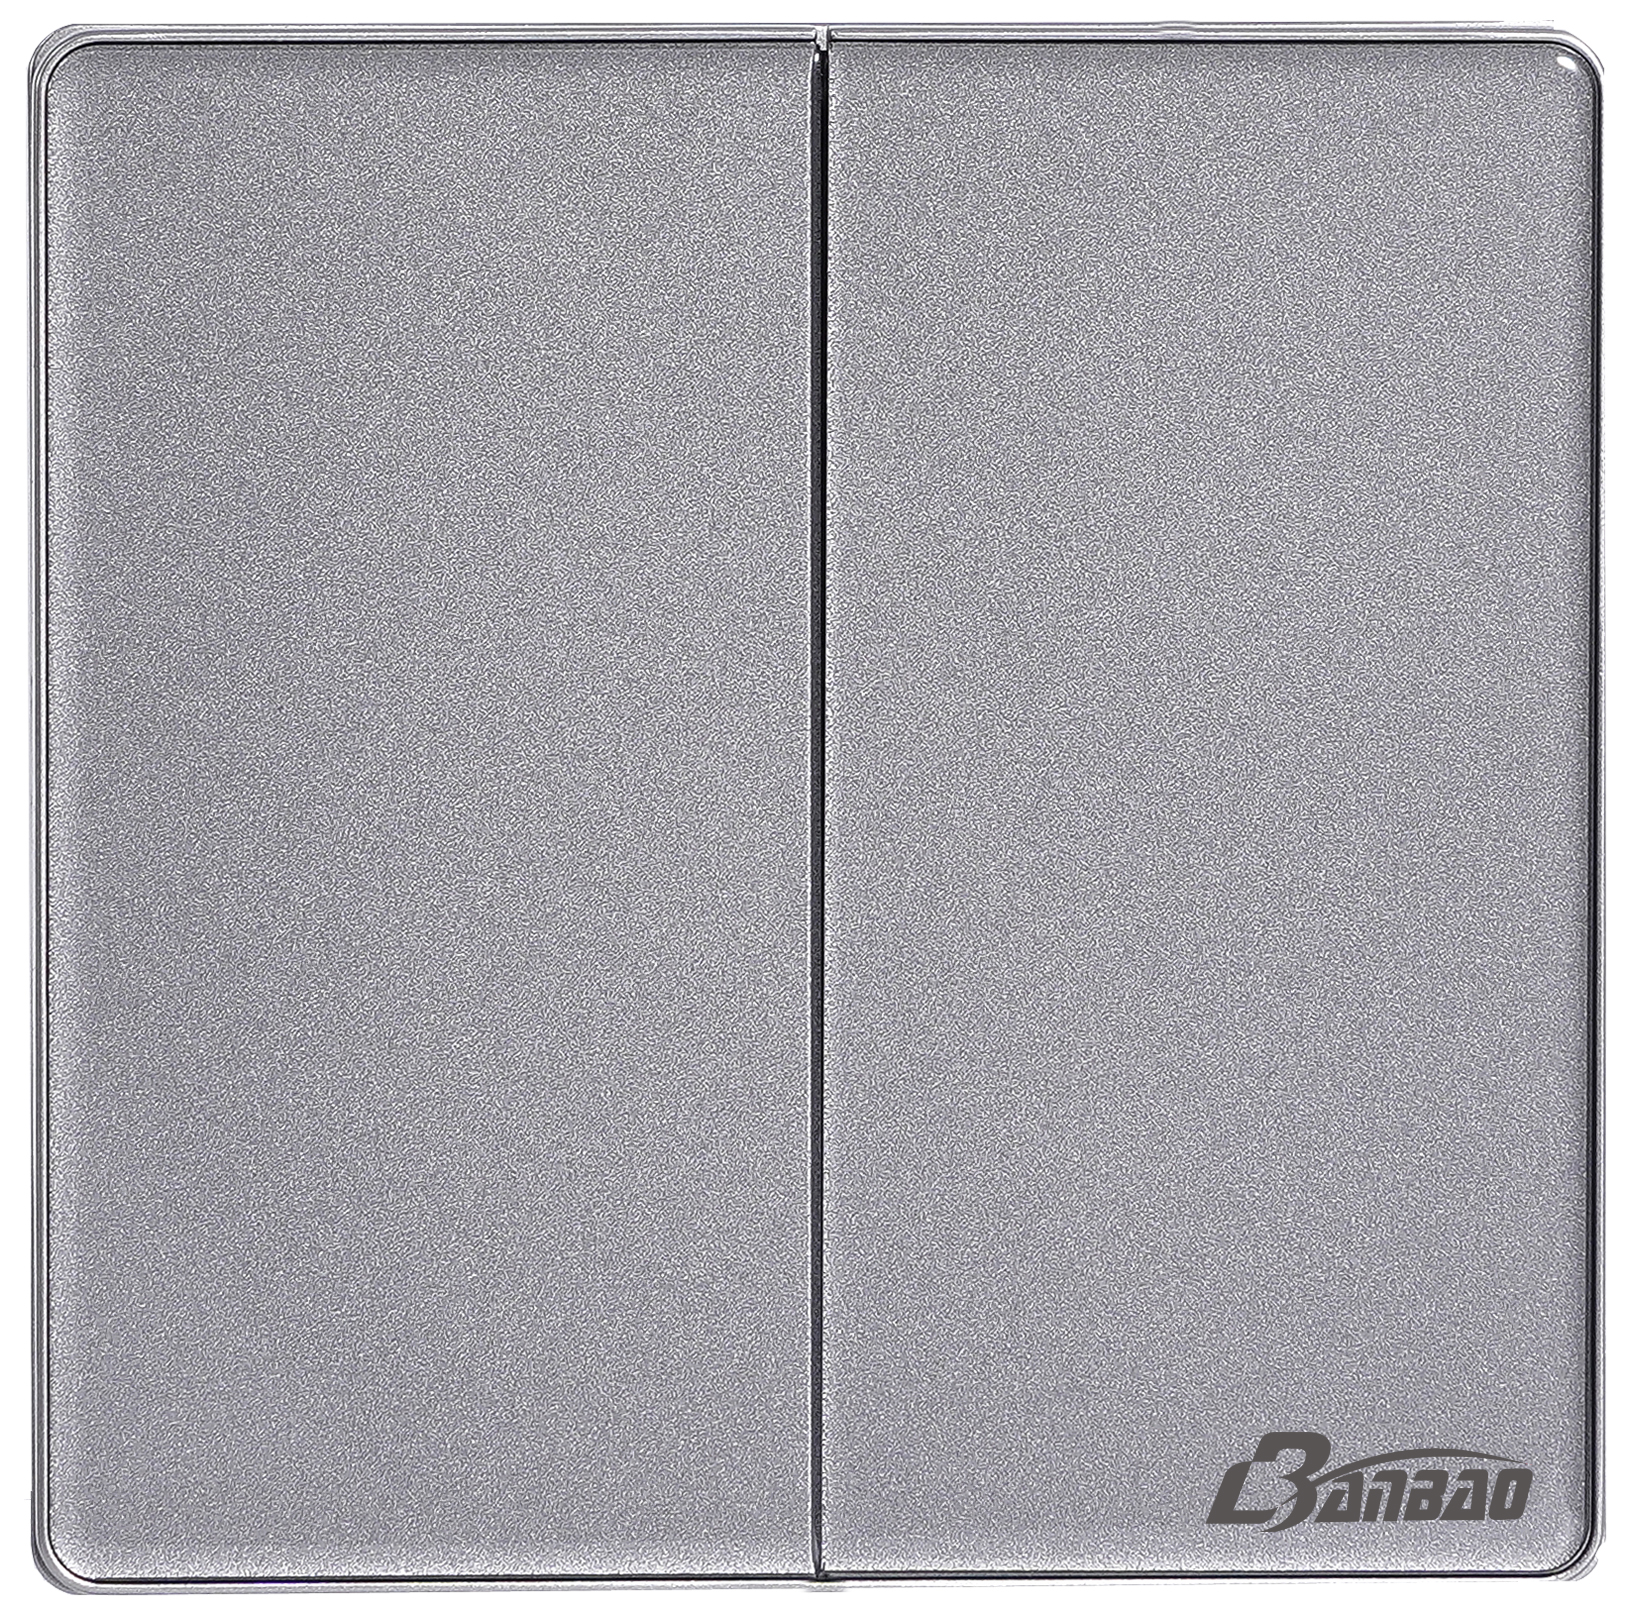 Glass panel 16A 2gang Wall Switch